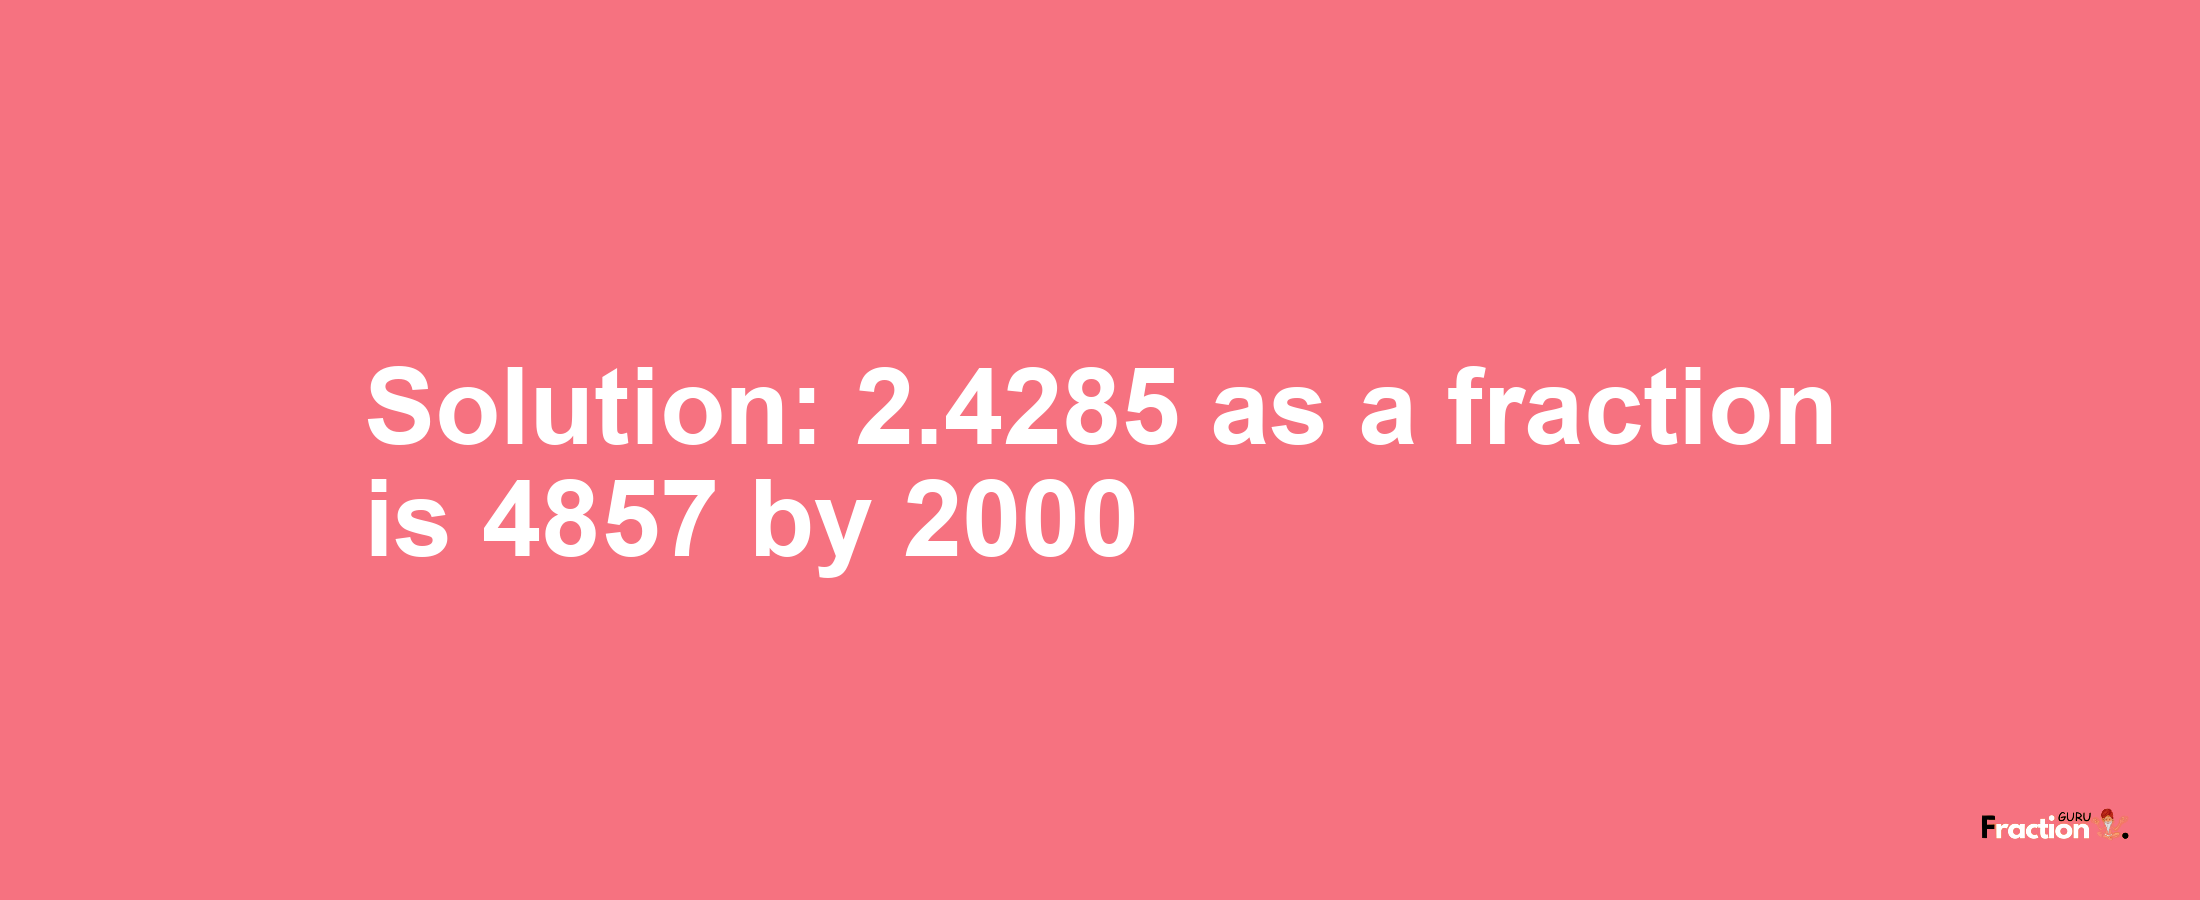 Solution:2.4285 as a fraction is 4857/2000